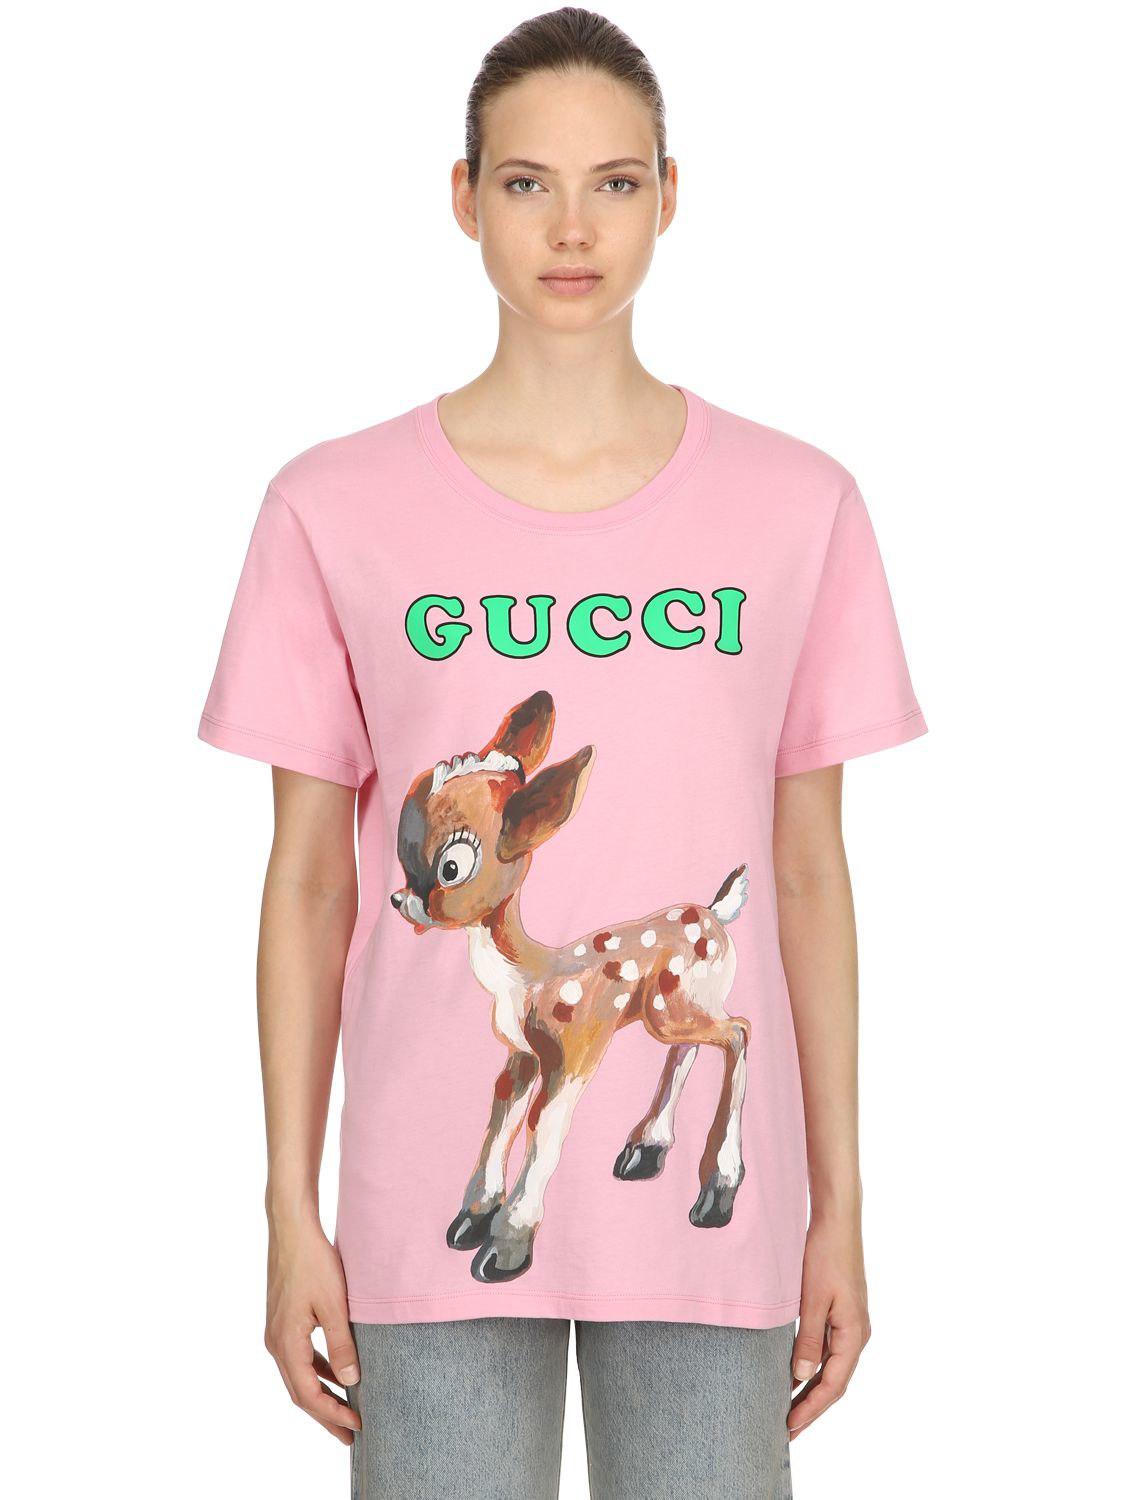 Gucci Bambi Printed Cotton Jersey T-shirt in Pink | Lyst